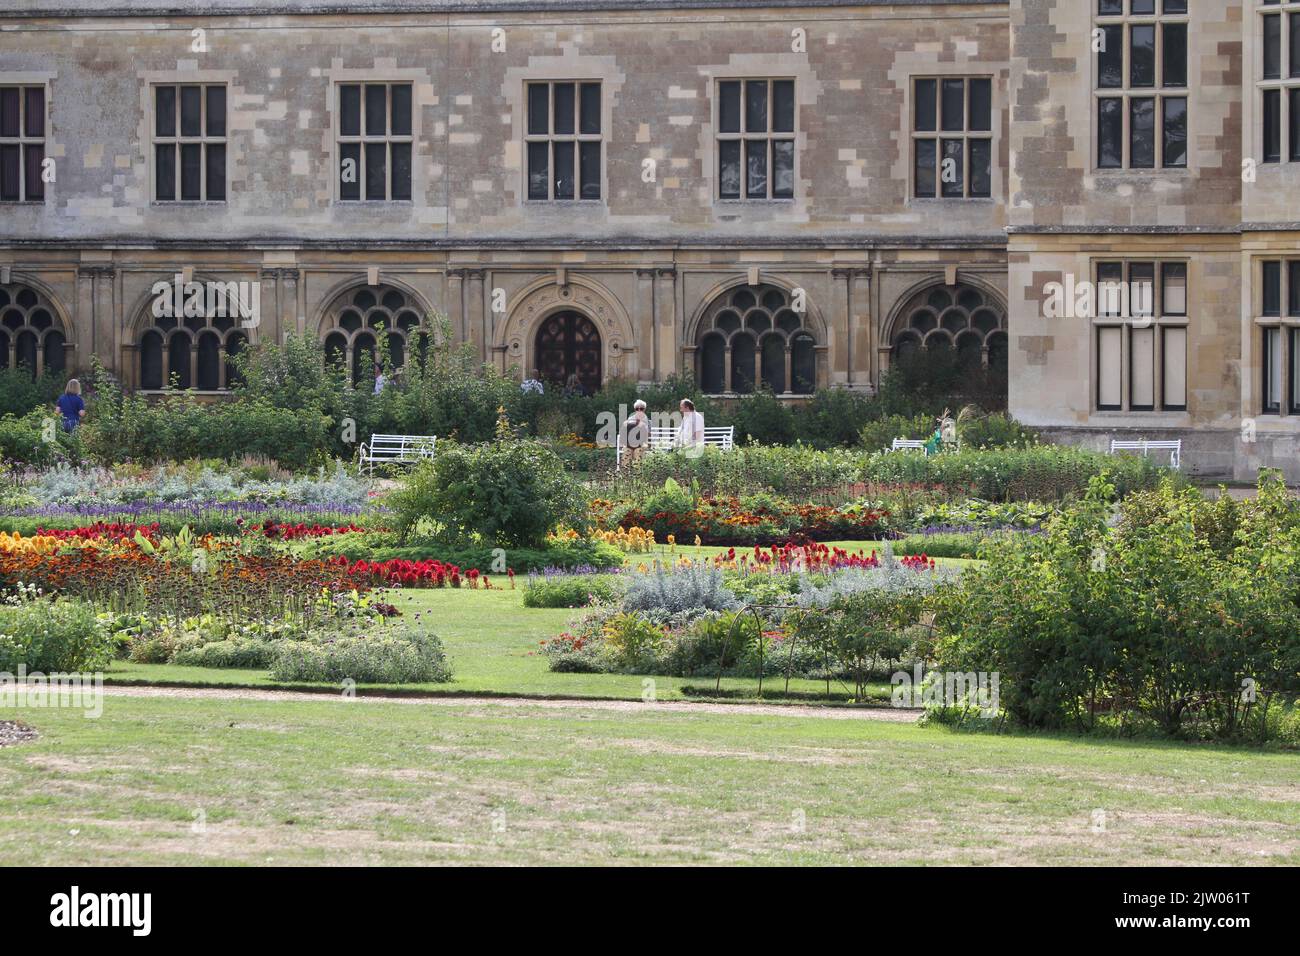 The first ever BBC Gardeners' World Autumn Fair is taking place at Audley End House in Essex. The beautiful Parterre garden at Audley End with people enjoying a relaxing break. Stock Photo